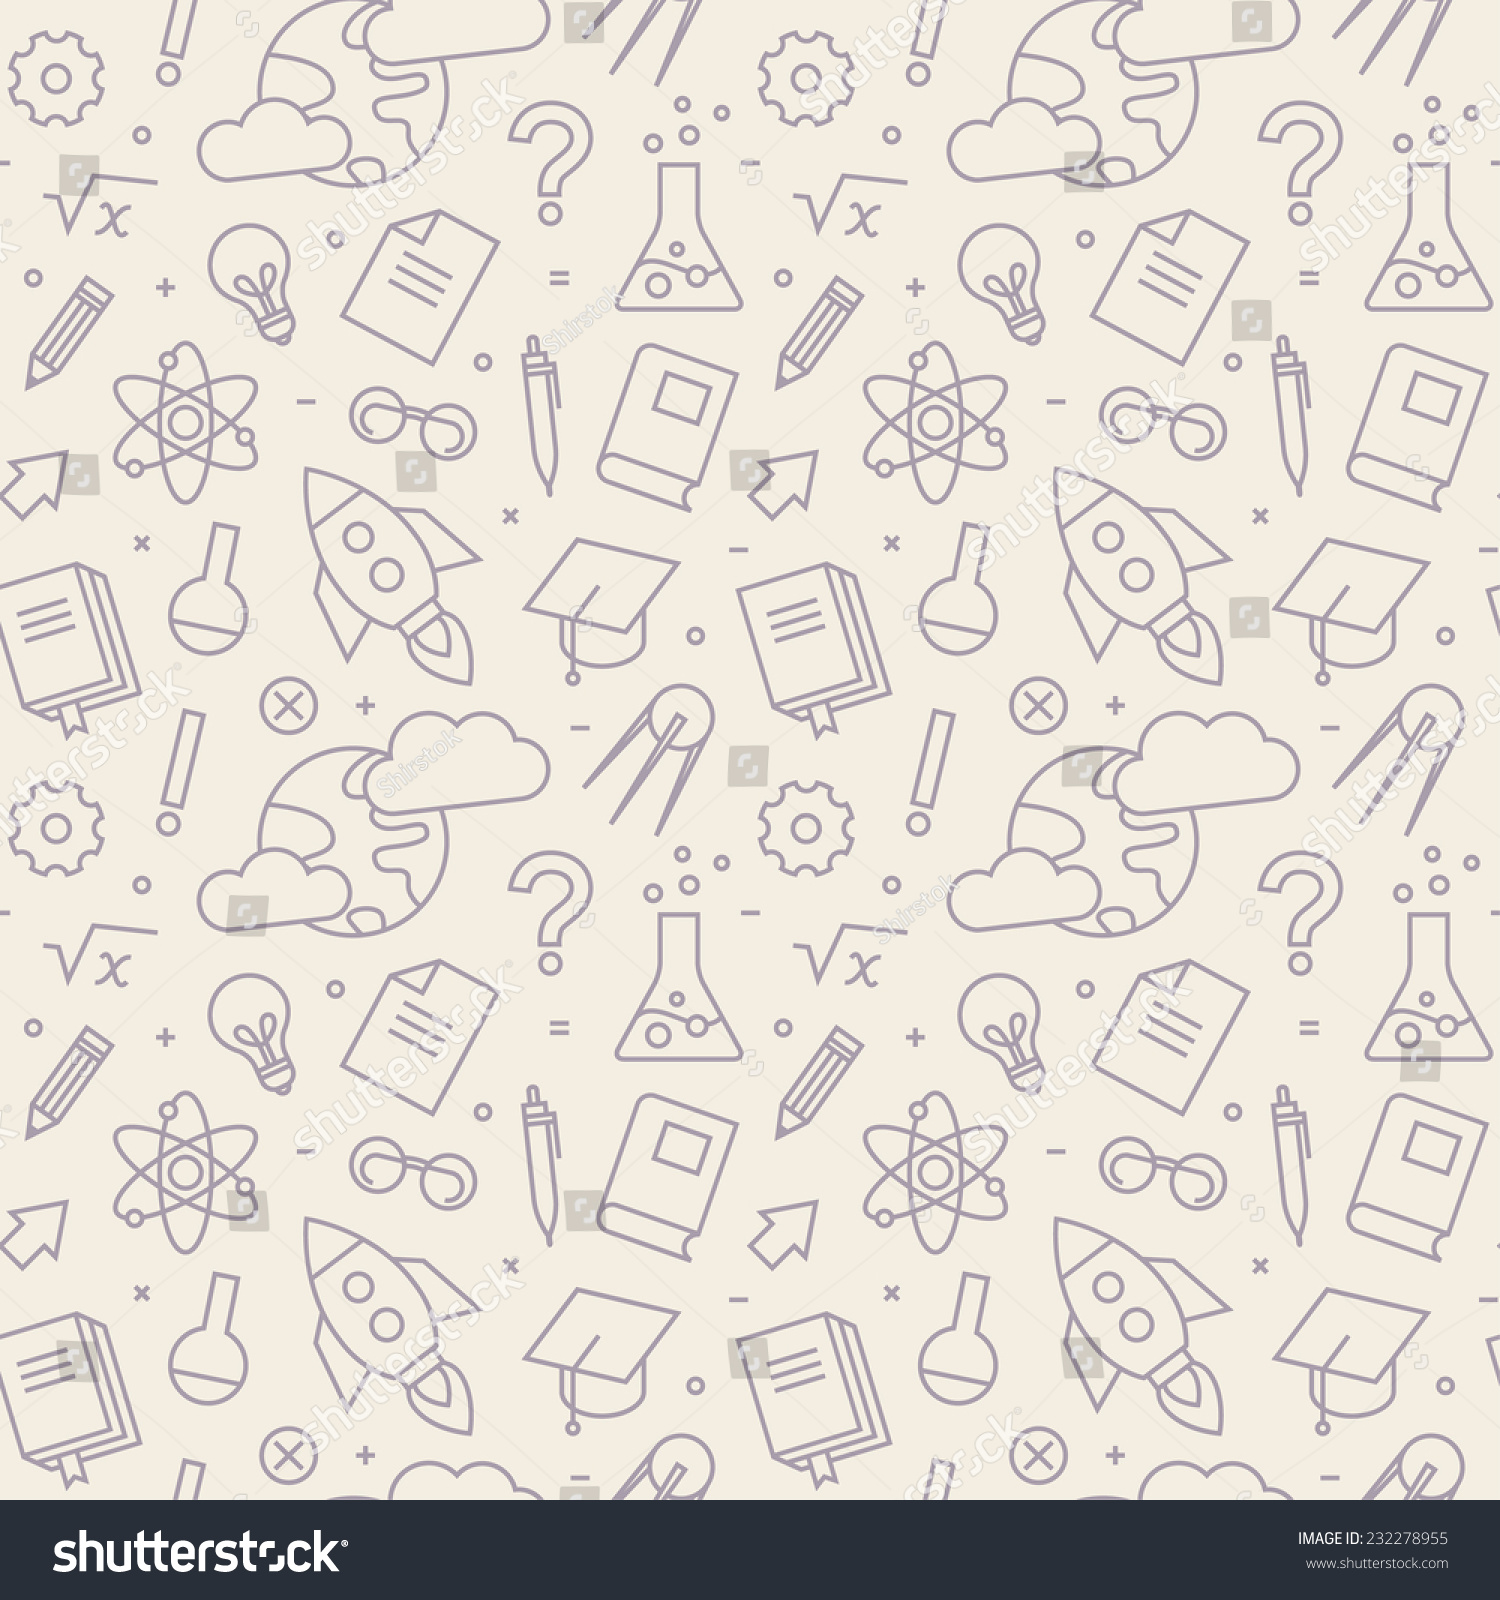 SVG of Seamless pattern with school icons. svg